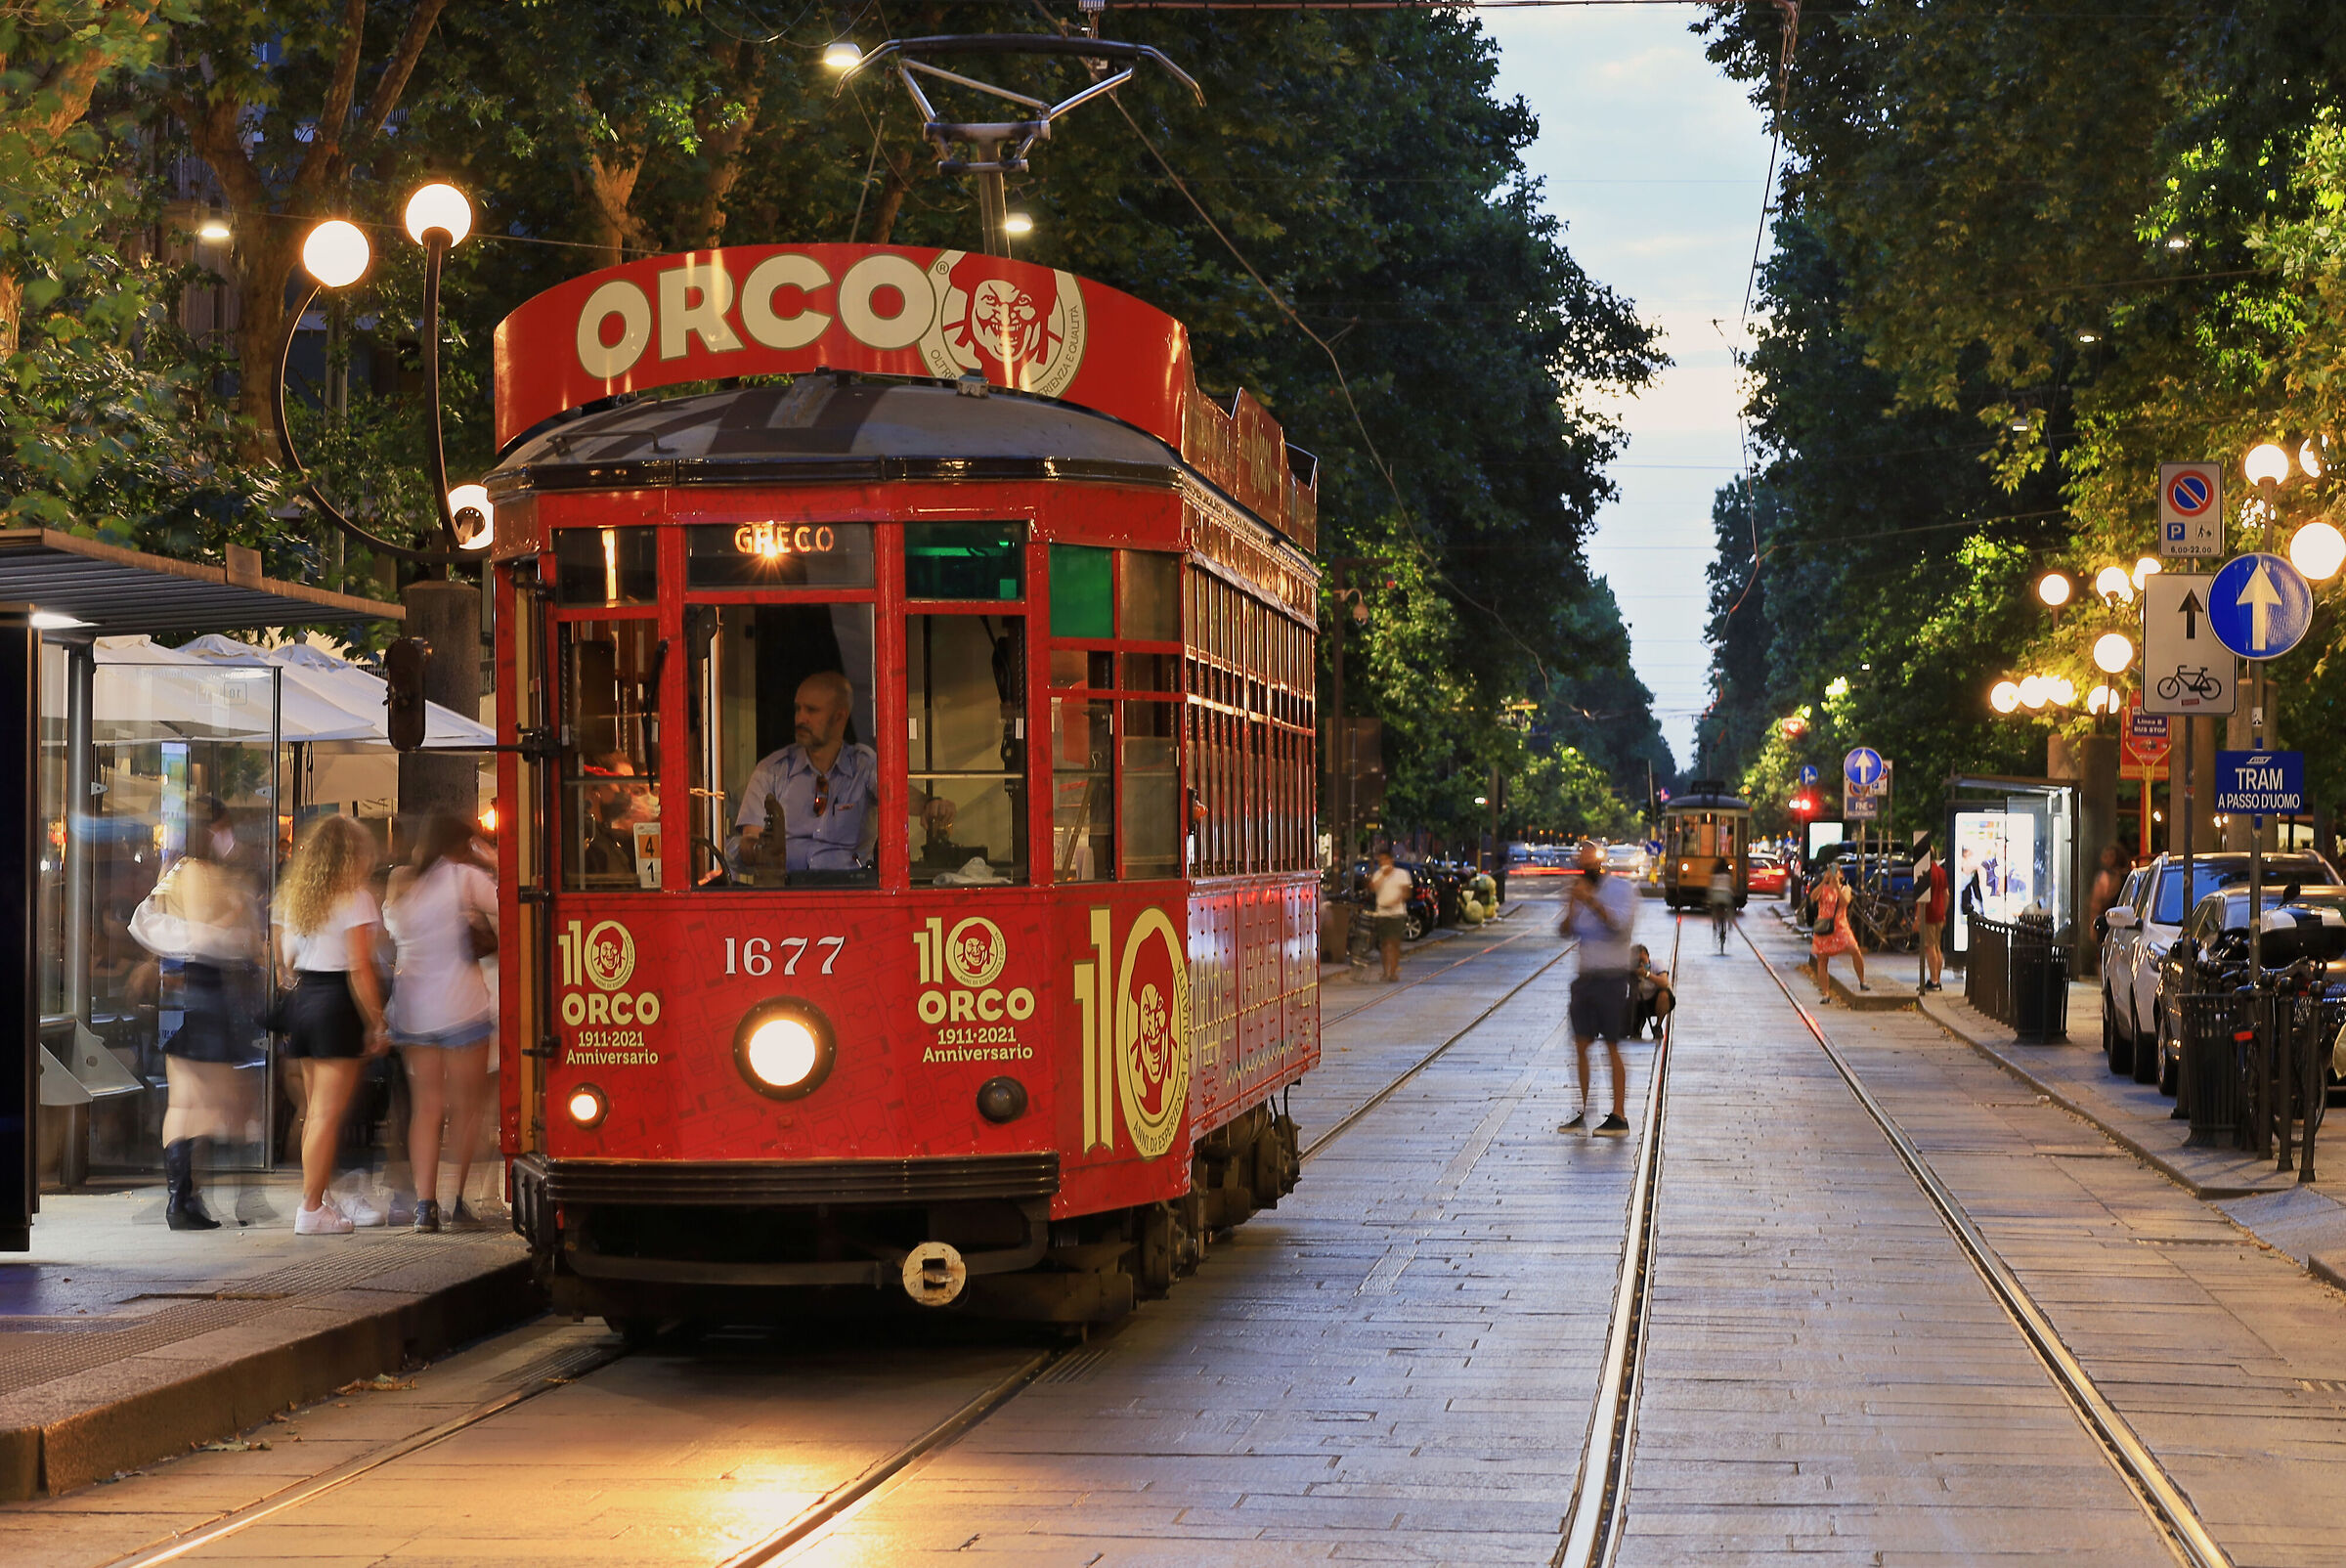 The tram, icon of Milan...